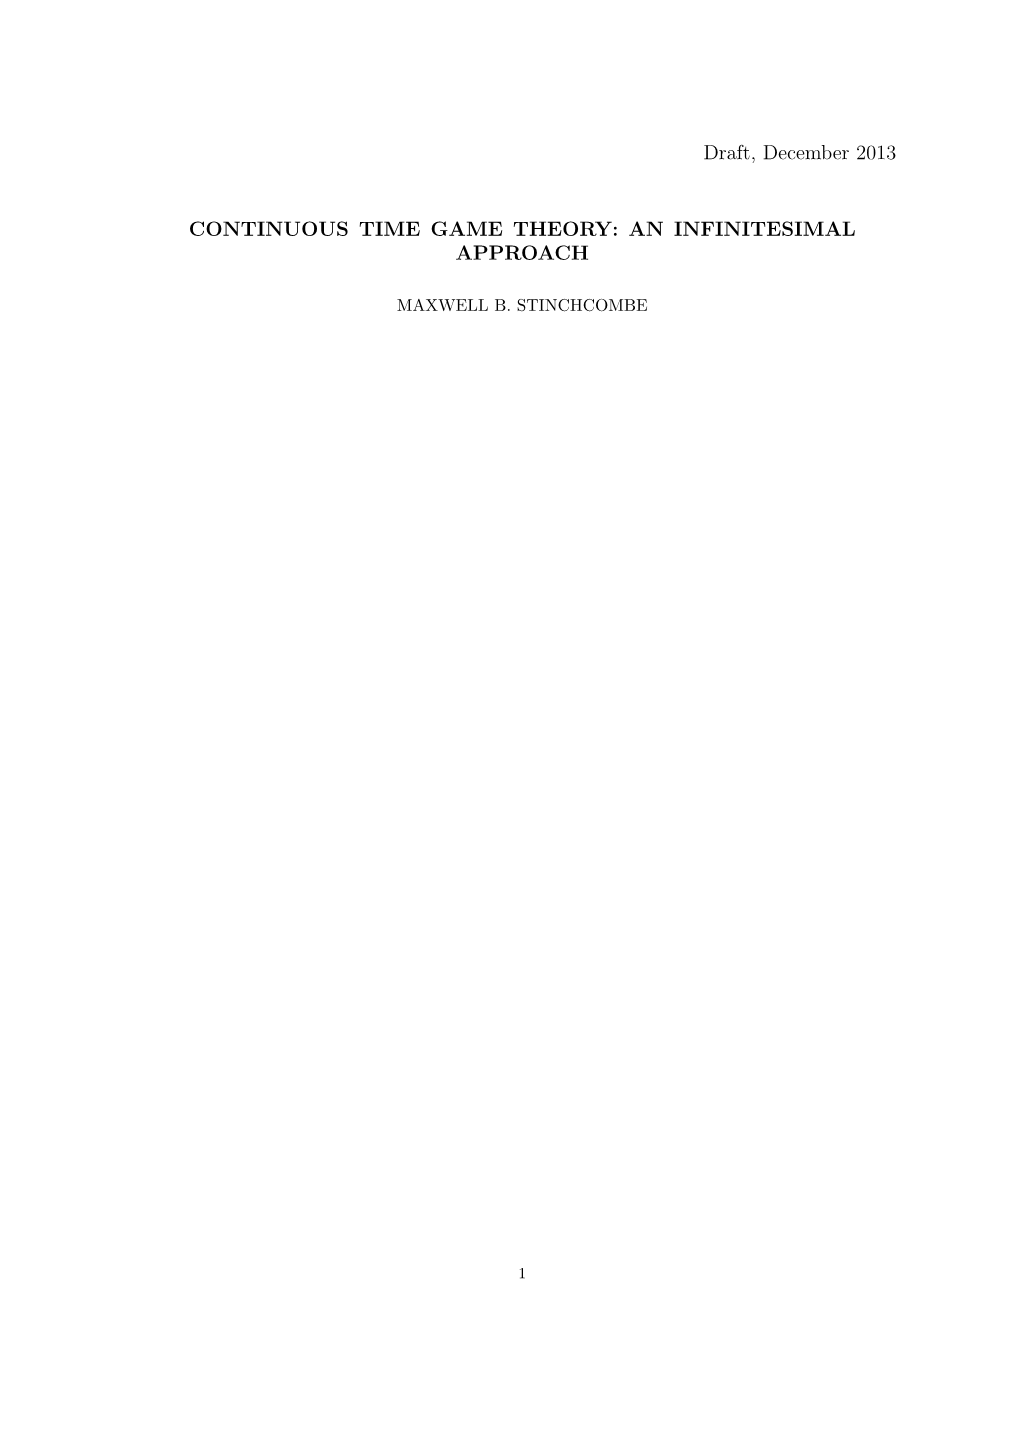 Draft, December 2013 CONTINUOUS TIME GAME THEORY: AN